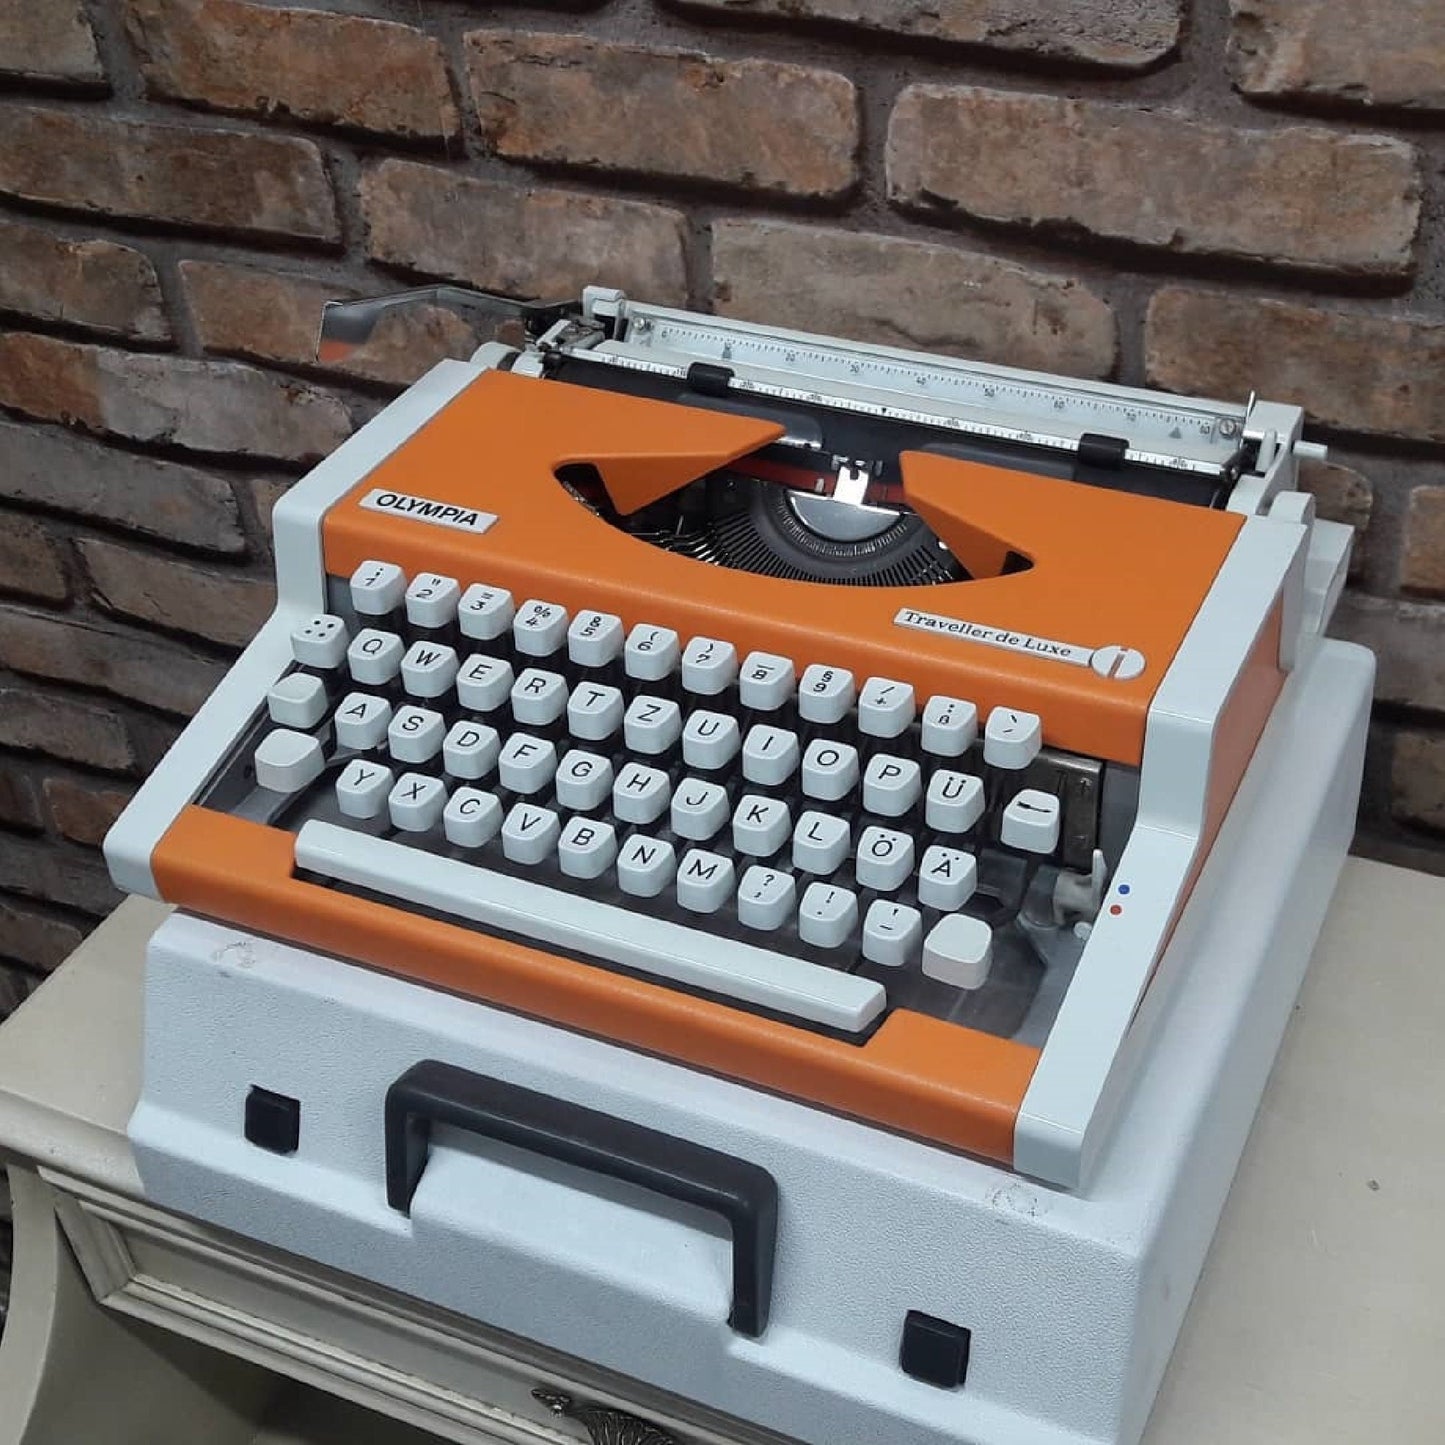 Olympia Traveller Deluxe Typewriter - Fully Functional, Vibrant Orange, and Includes a Stylish White Bag